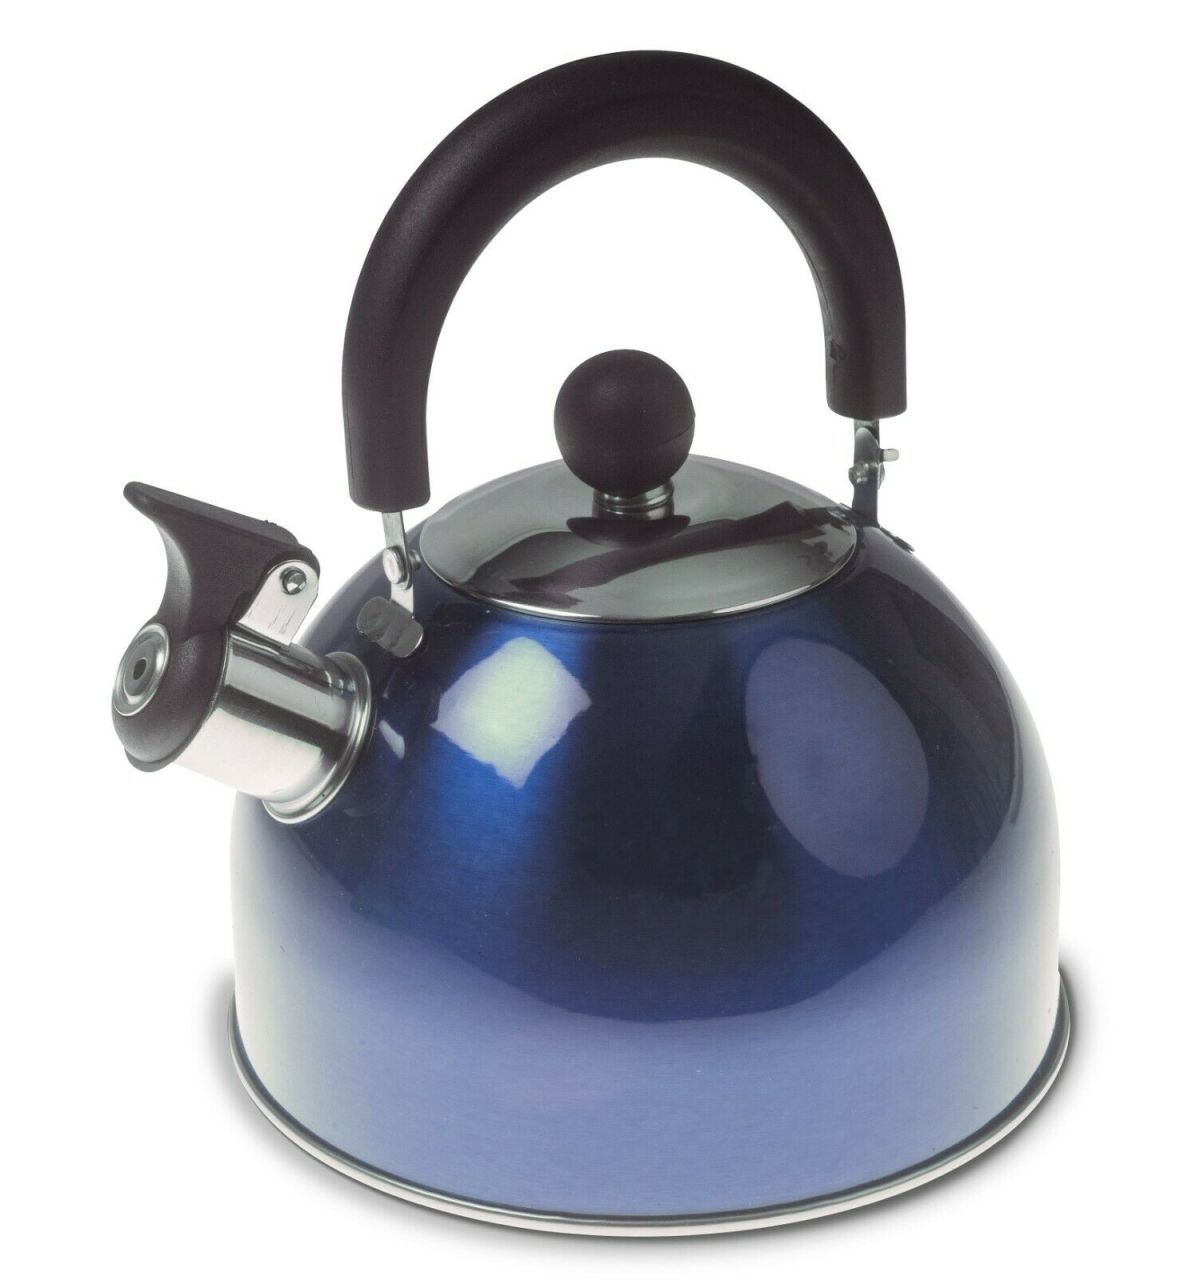 Summit Su Isıtıcıs 2 Litre / Whistling Kettle with Colour Coating 2